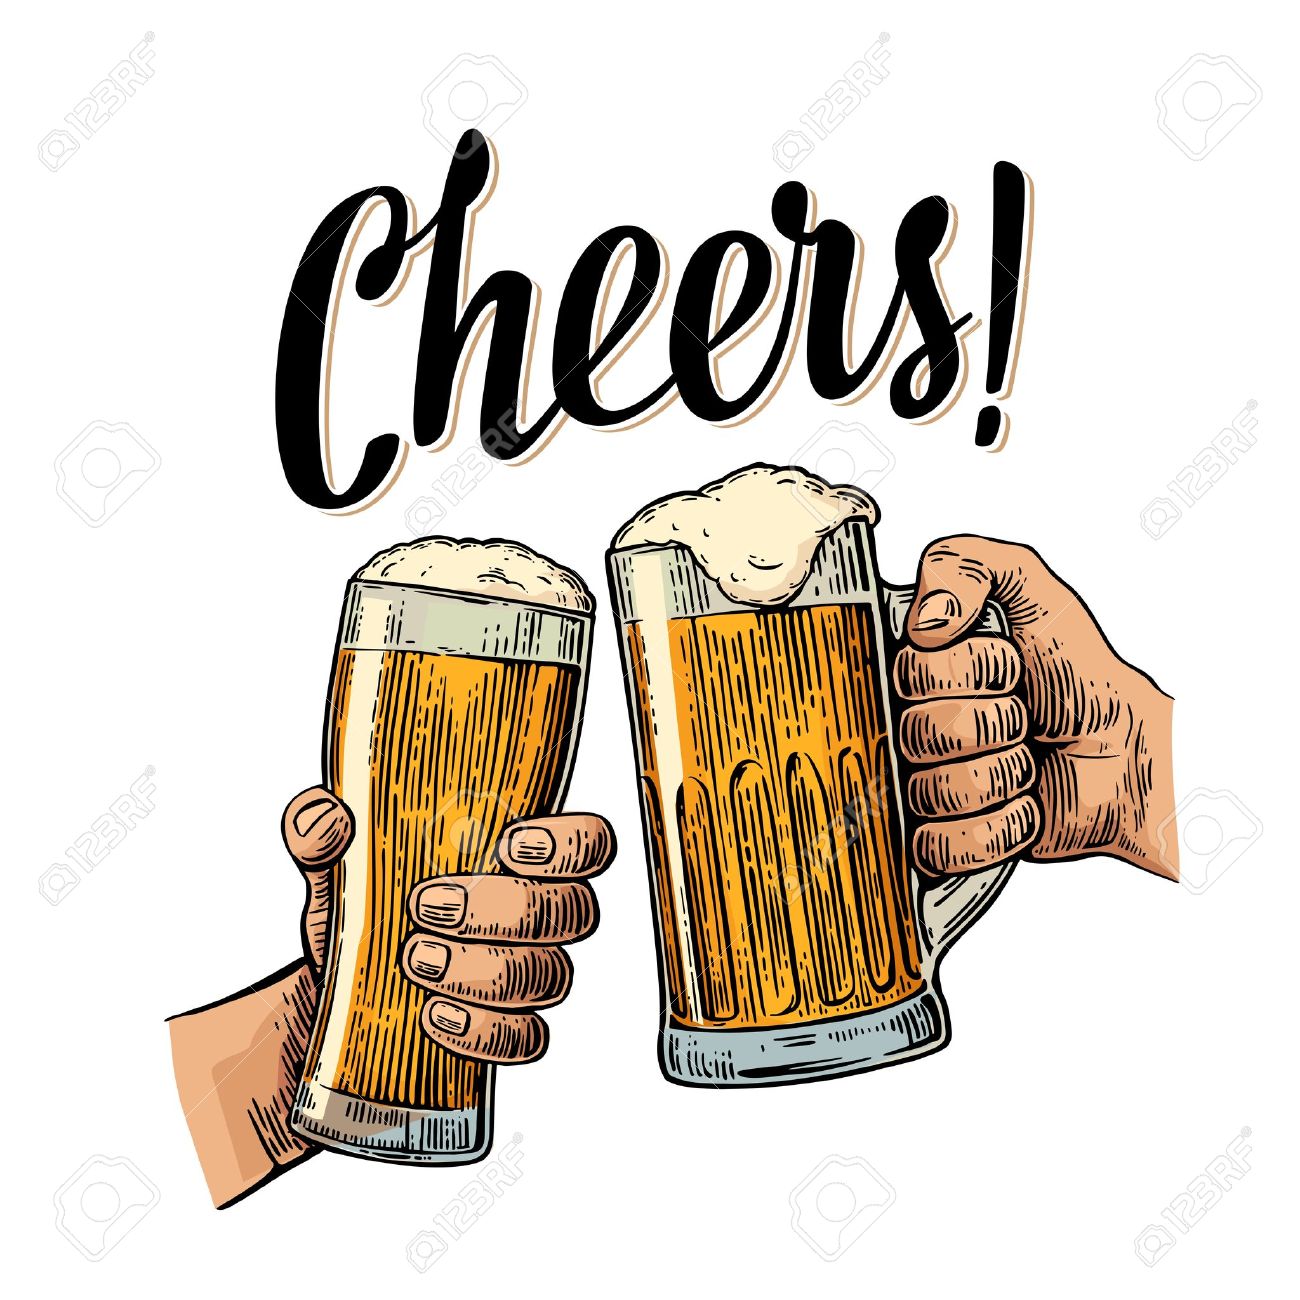 63906059-two-hands-holding-and-clinking-with-two-beer-glasses-mug-cheers-toast-lettering-vintage-color-engrav.jpg